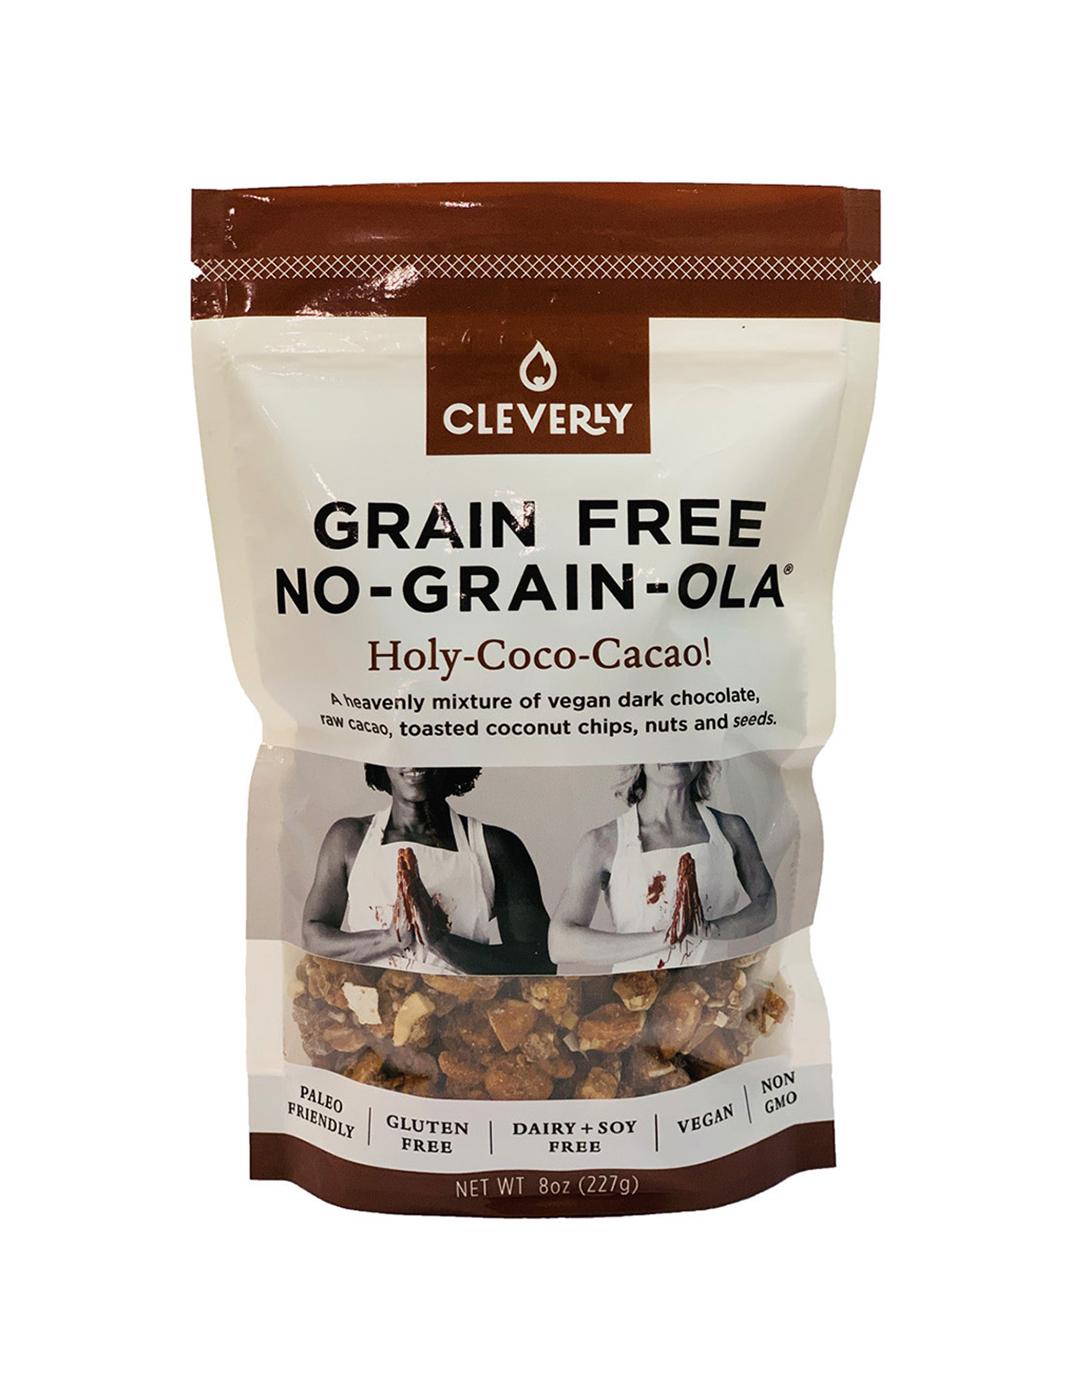 Cleverly Grain-Free No-Grain-Ola - Holy-Coco-Cacao!; image 1 of 6